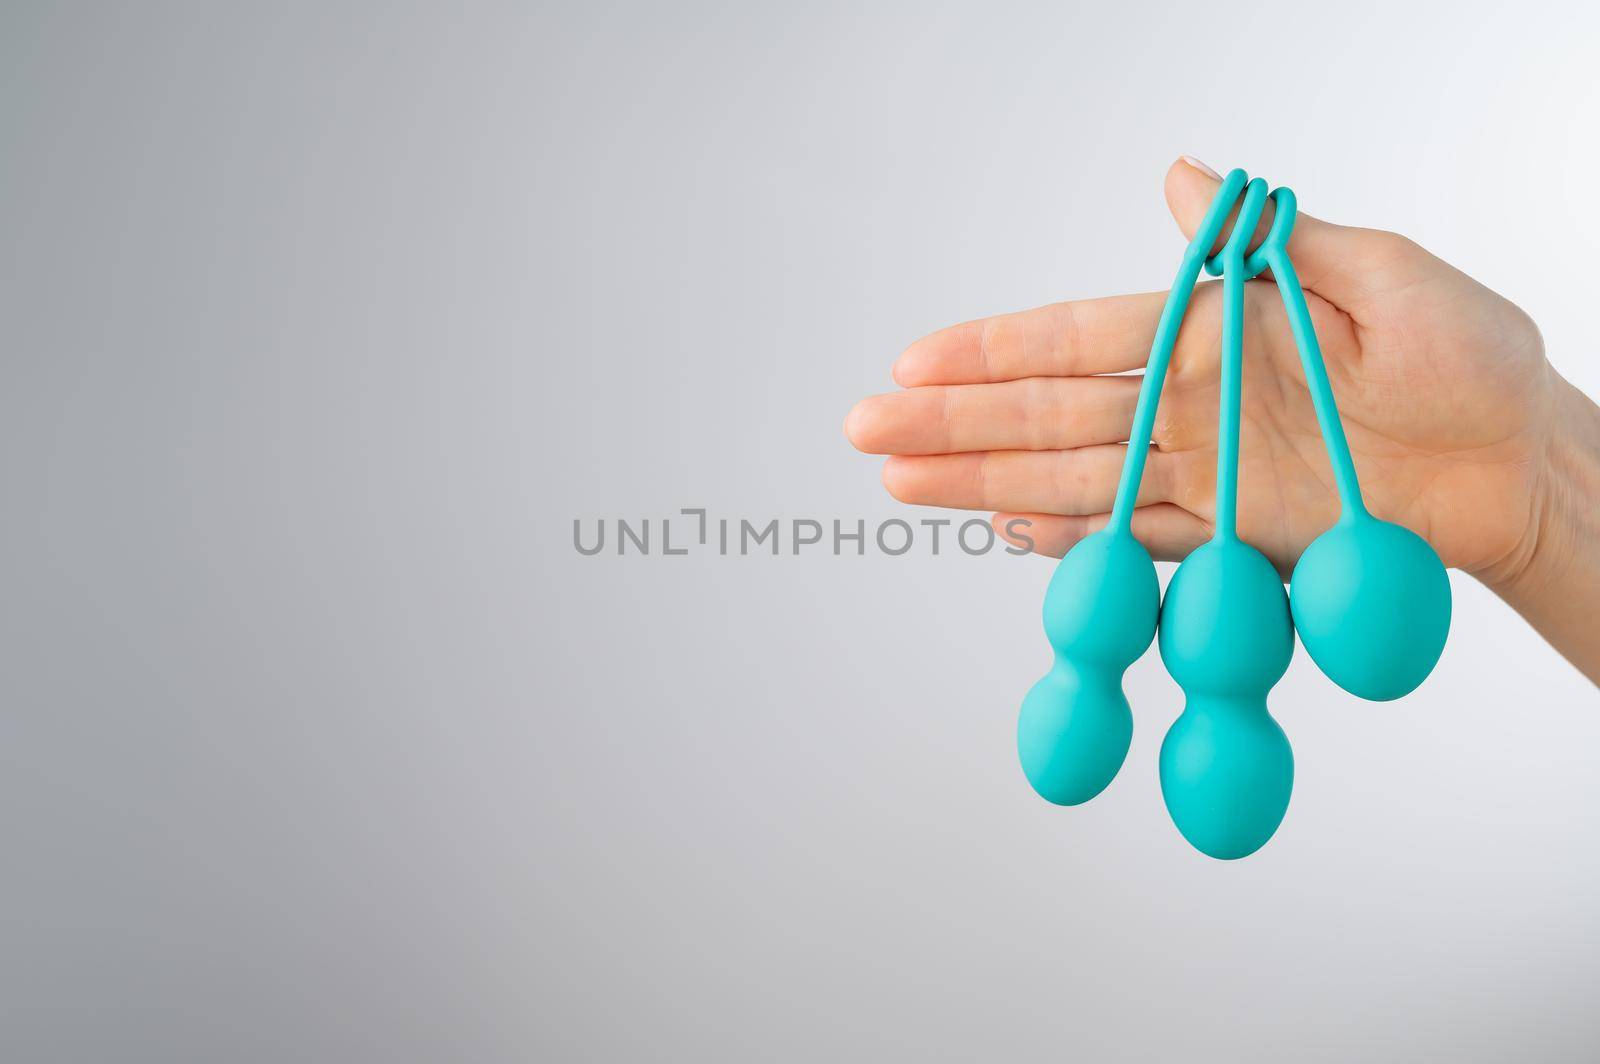 A faceless woman demonstrates a set of mint-colored vaginal balls. Girl holding a kegel trainer for training pelvic floor muscles on a white background. by mrwed54